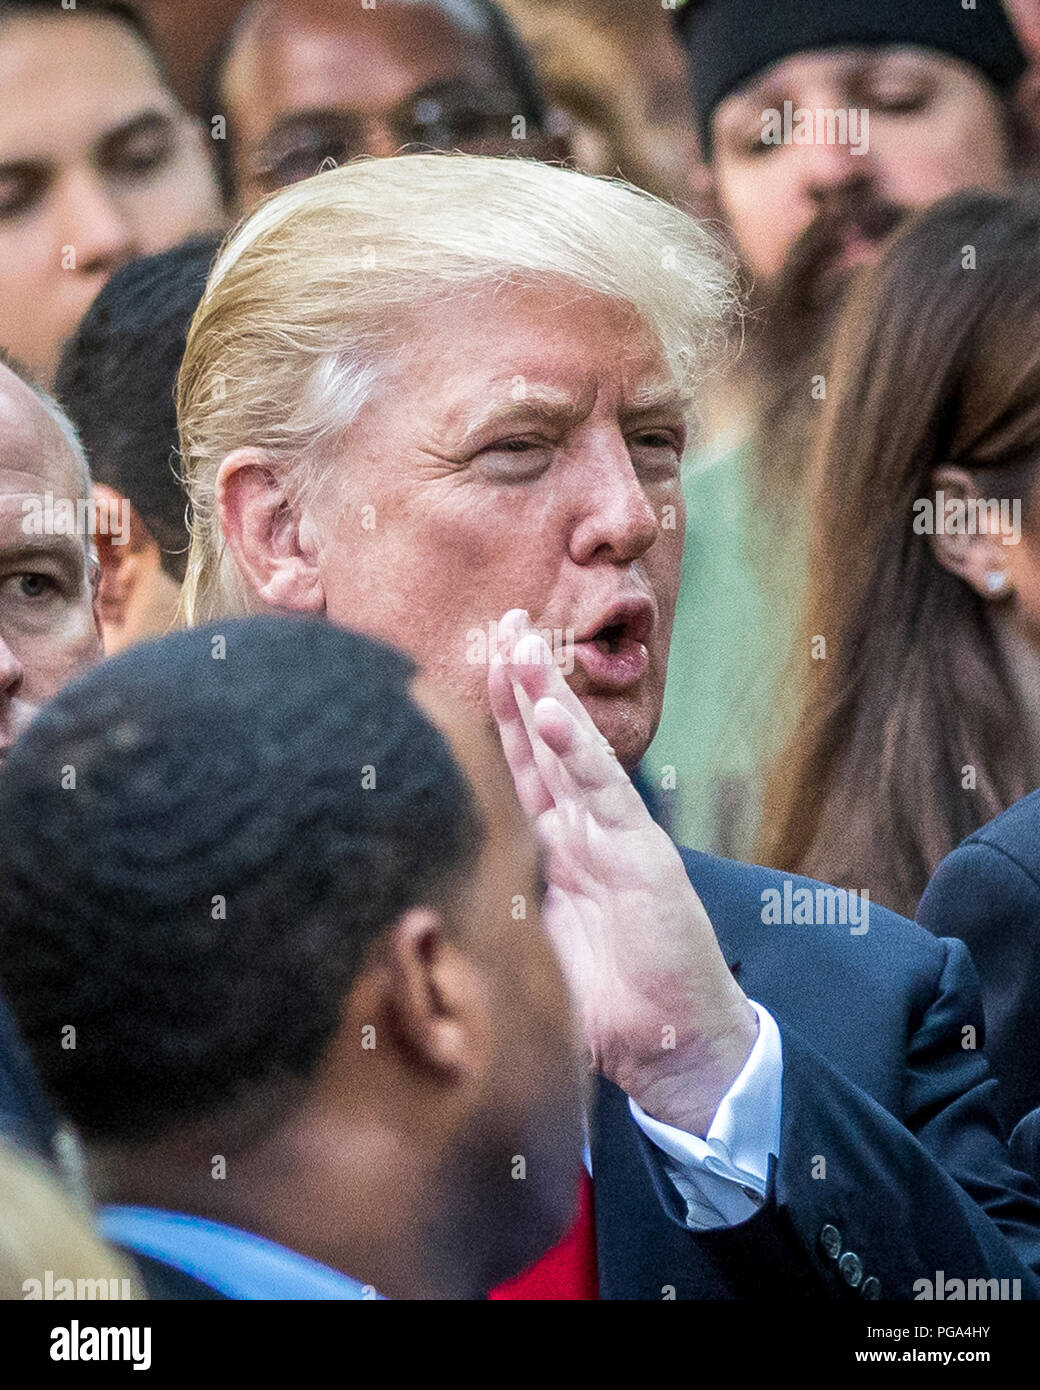 New York, USA, 11 September 2016. US President Donald Trump (candidate at the time) attends a September 11 ceremony in New York City in 2016.  Photo b Stock Photo